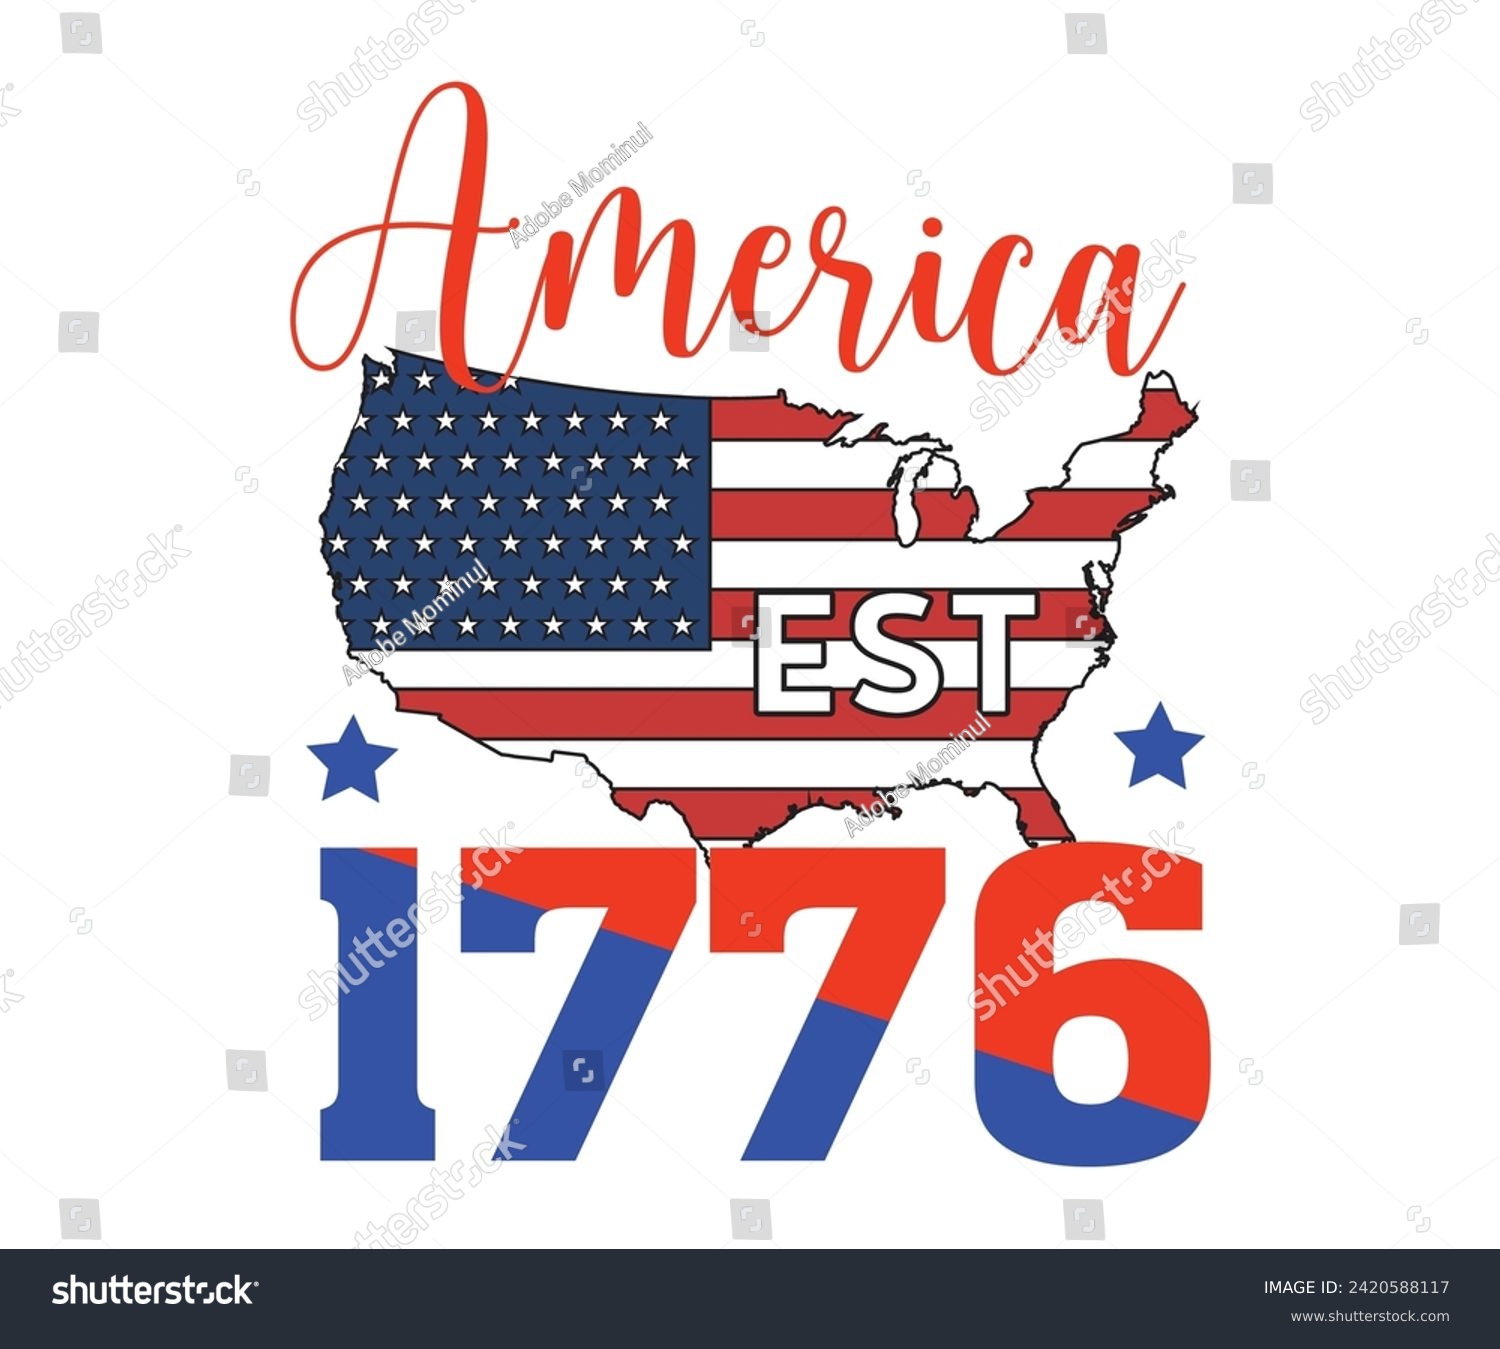 SVG of America Est 1776 Svg,Independence Day,Patriot Svg,4th of July Svg,America Svg,USA Flag Svg,4th of July Quotes,Freedom Shirt,Memorial Day,Svg Cut Files,USA T-shirt,American Flag, svg